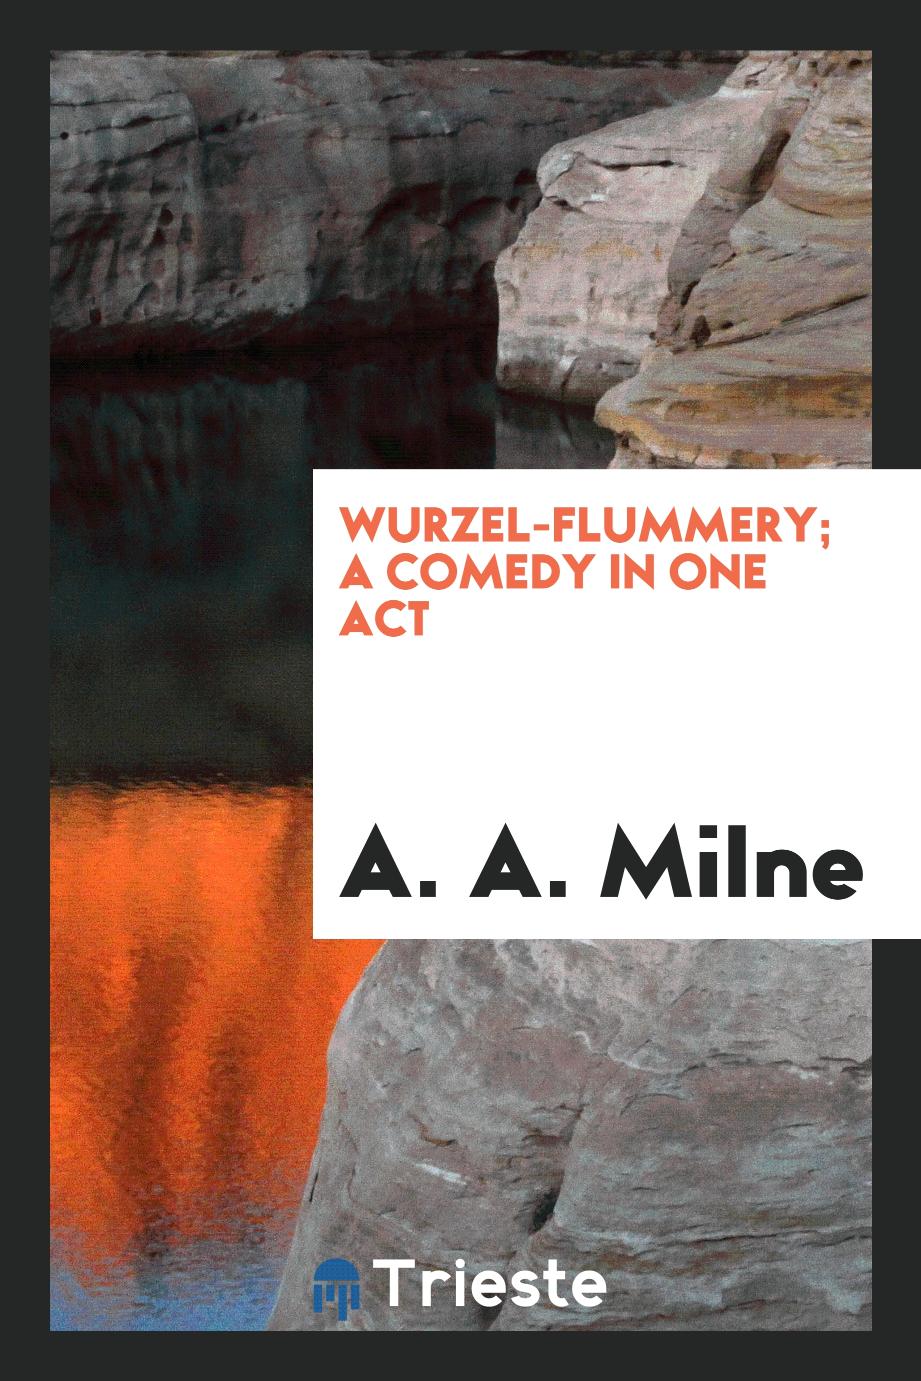 A. A. Milne - Wurzel-Flummery; a comedy in one act